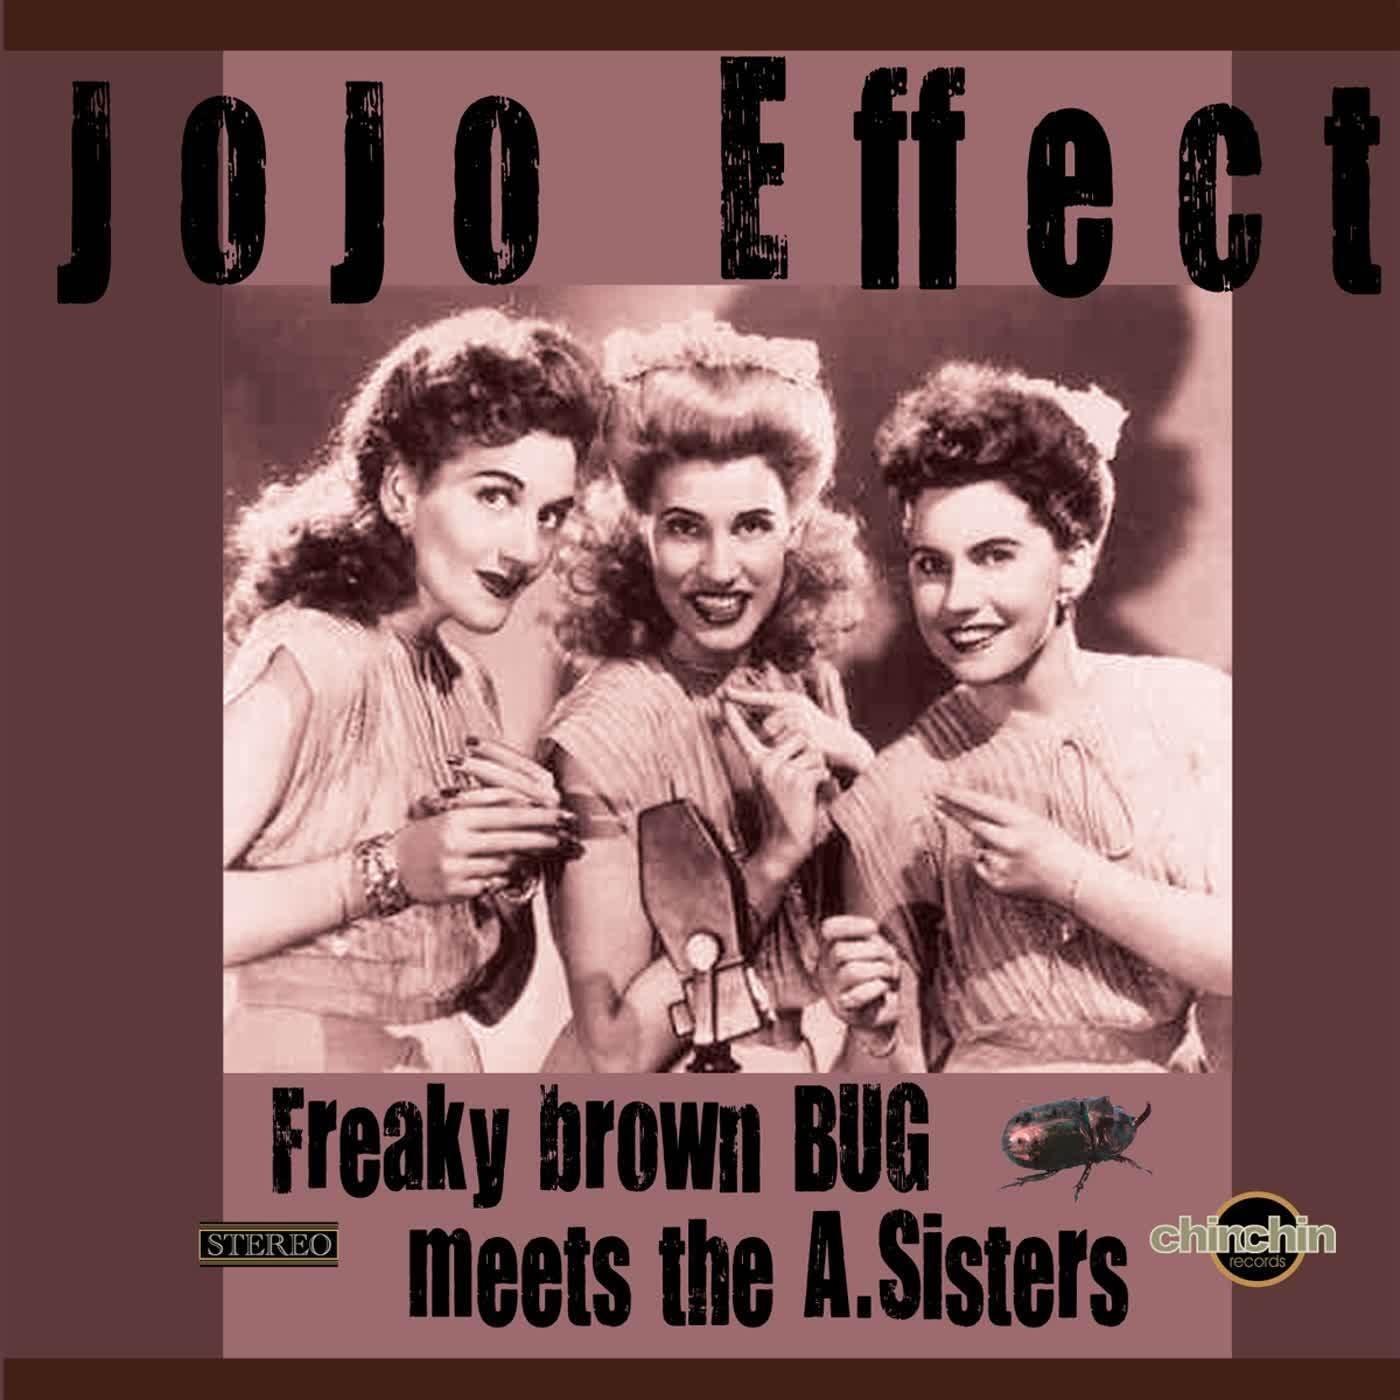 Freaky Brown Bug meets the A. Sisters